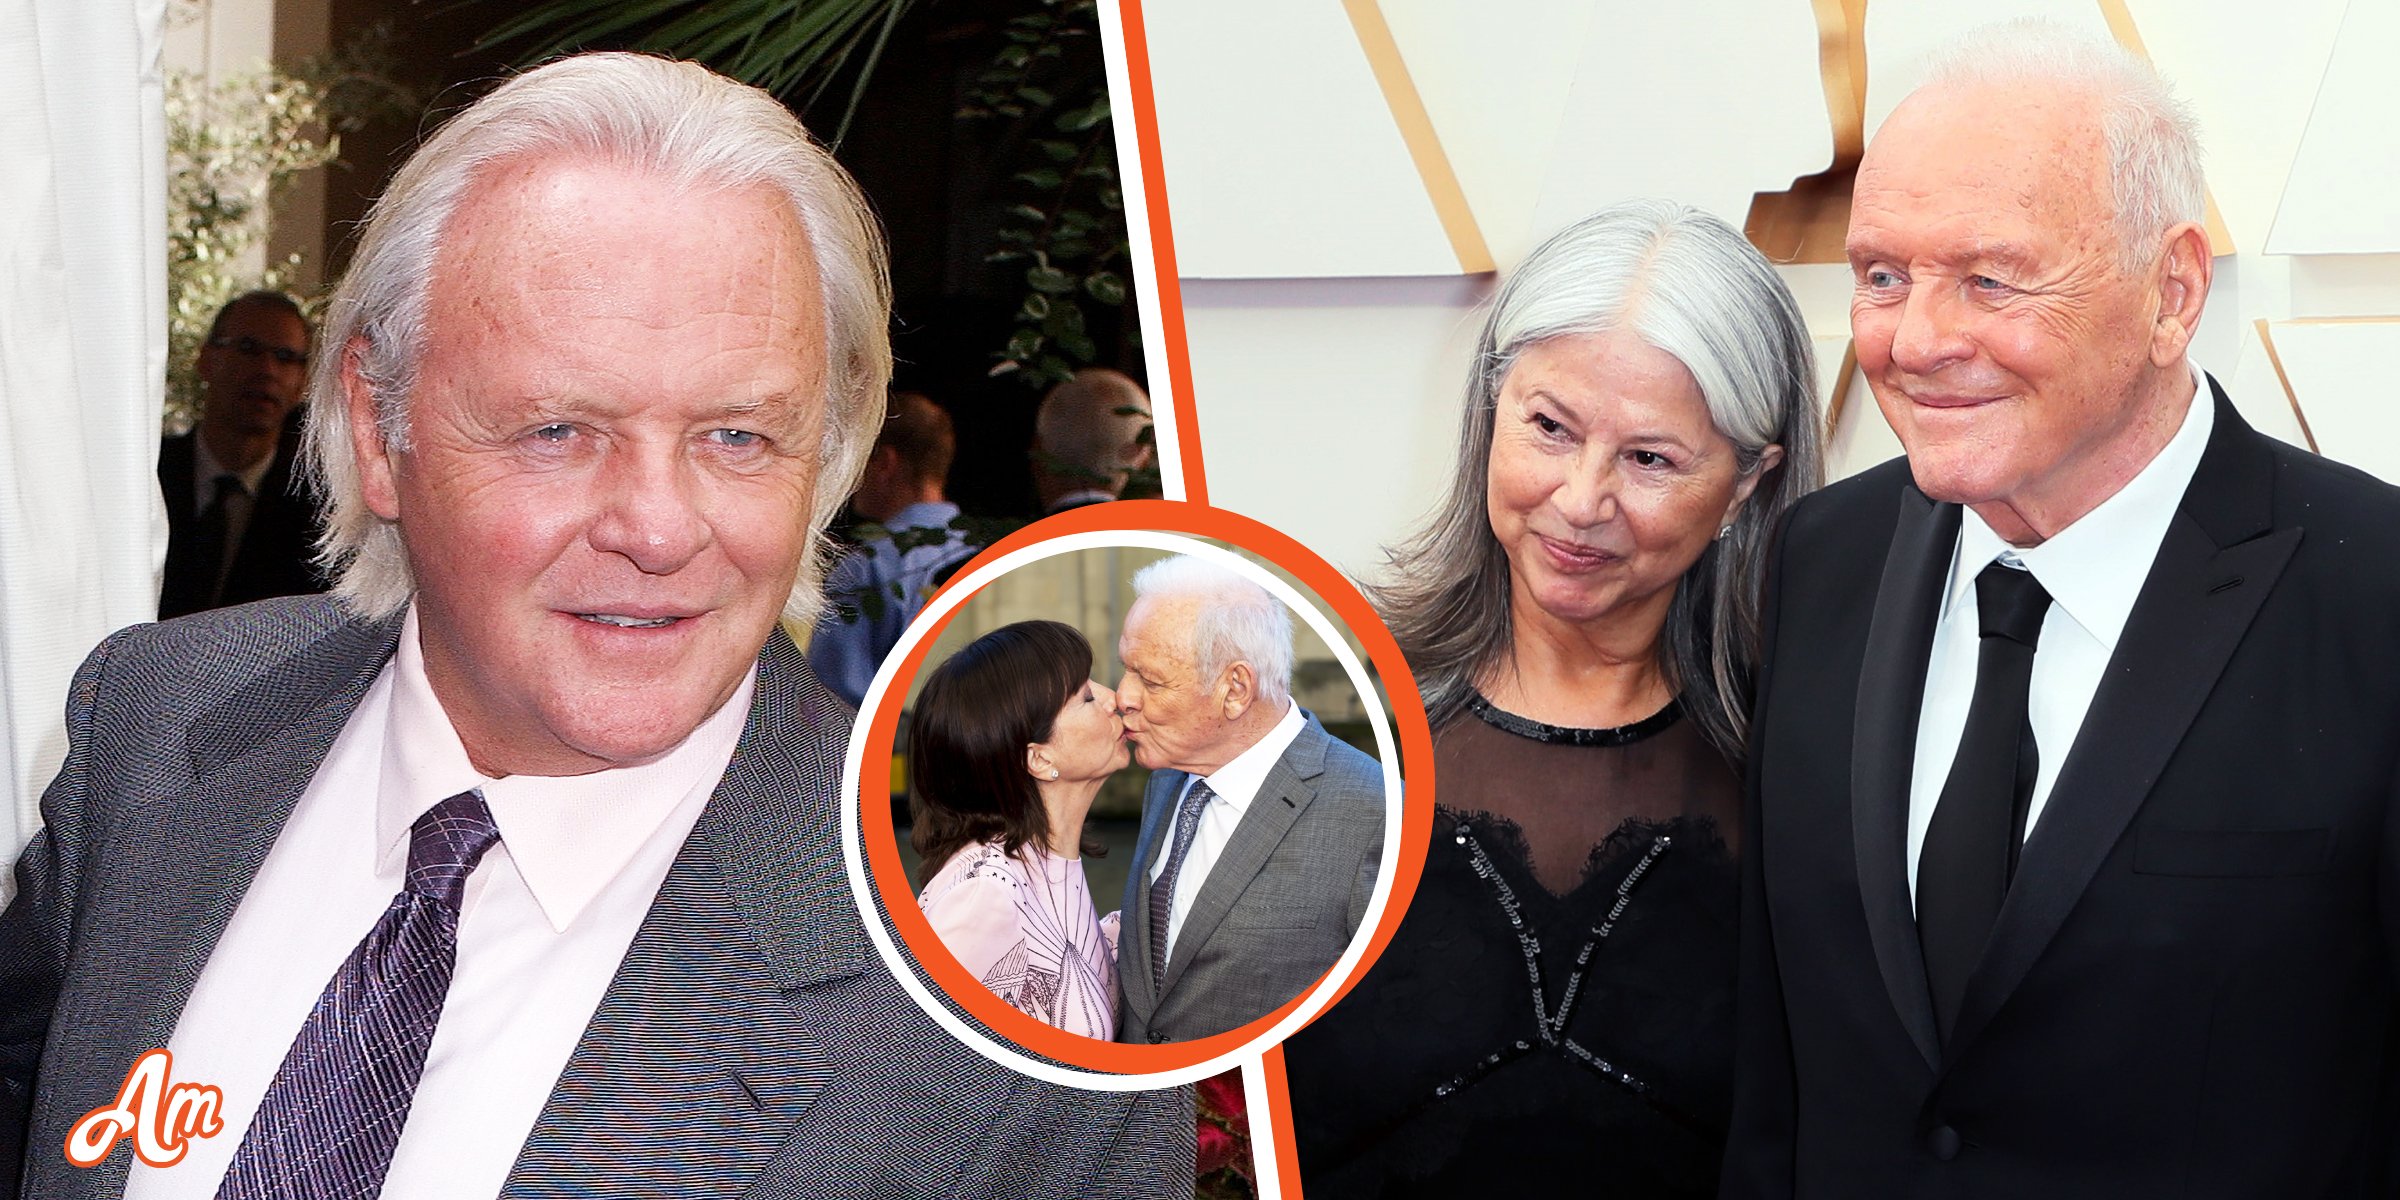 Anthony Hopkins Turns He Enjoys Private Life With Wife With Whom He